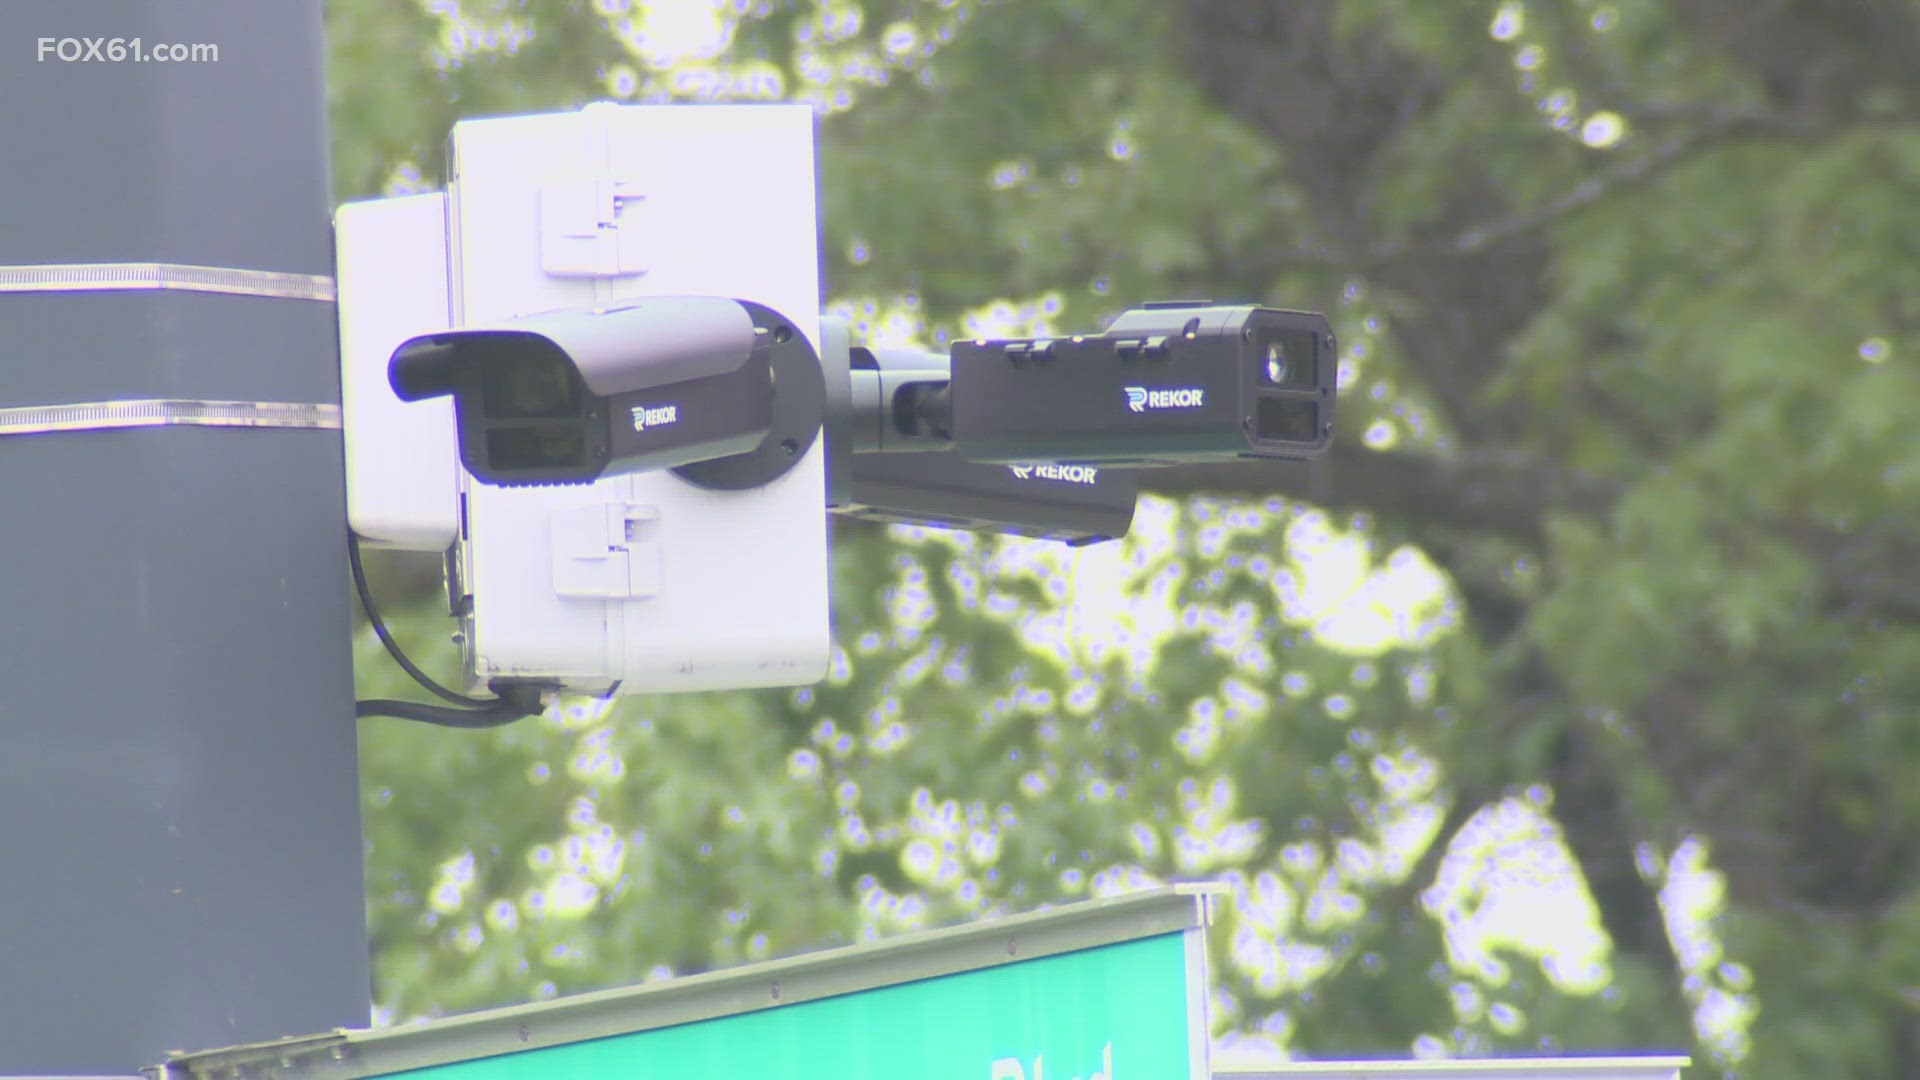 The city has already identified 19 core locations for the cameras based on crash history and other factors.